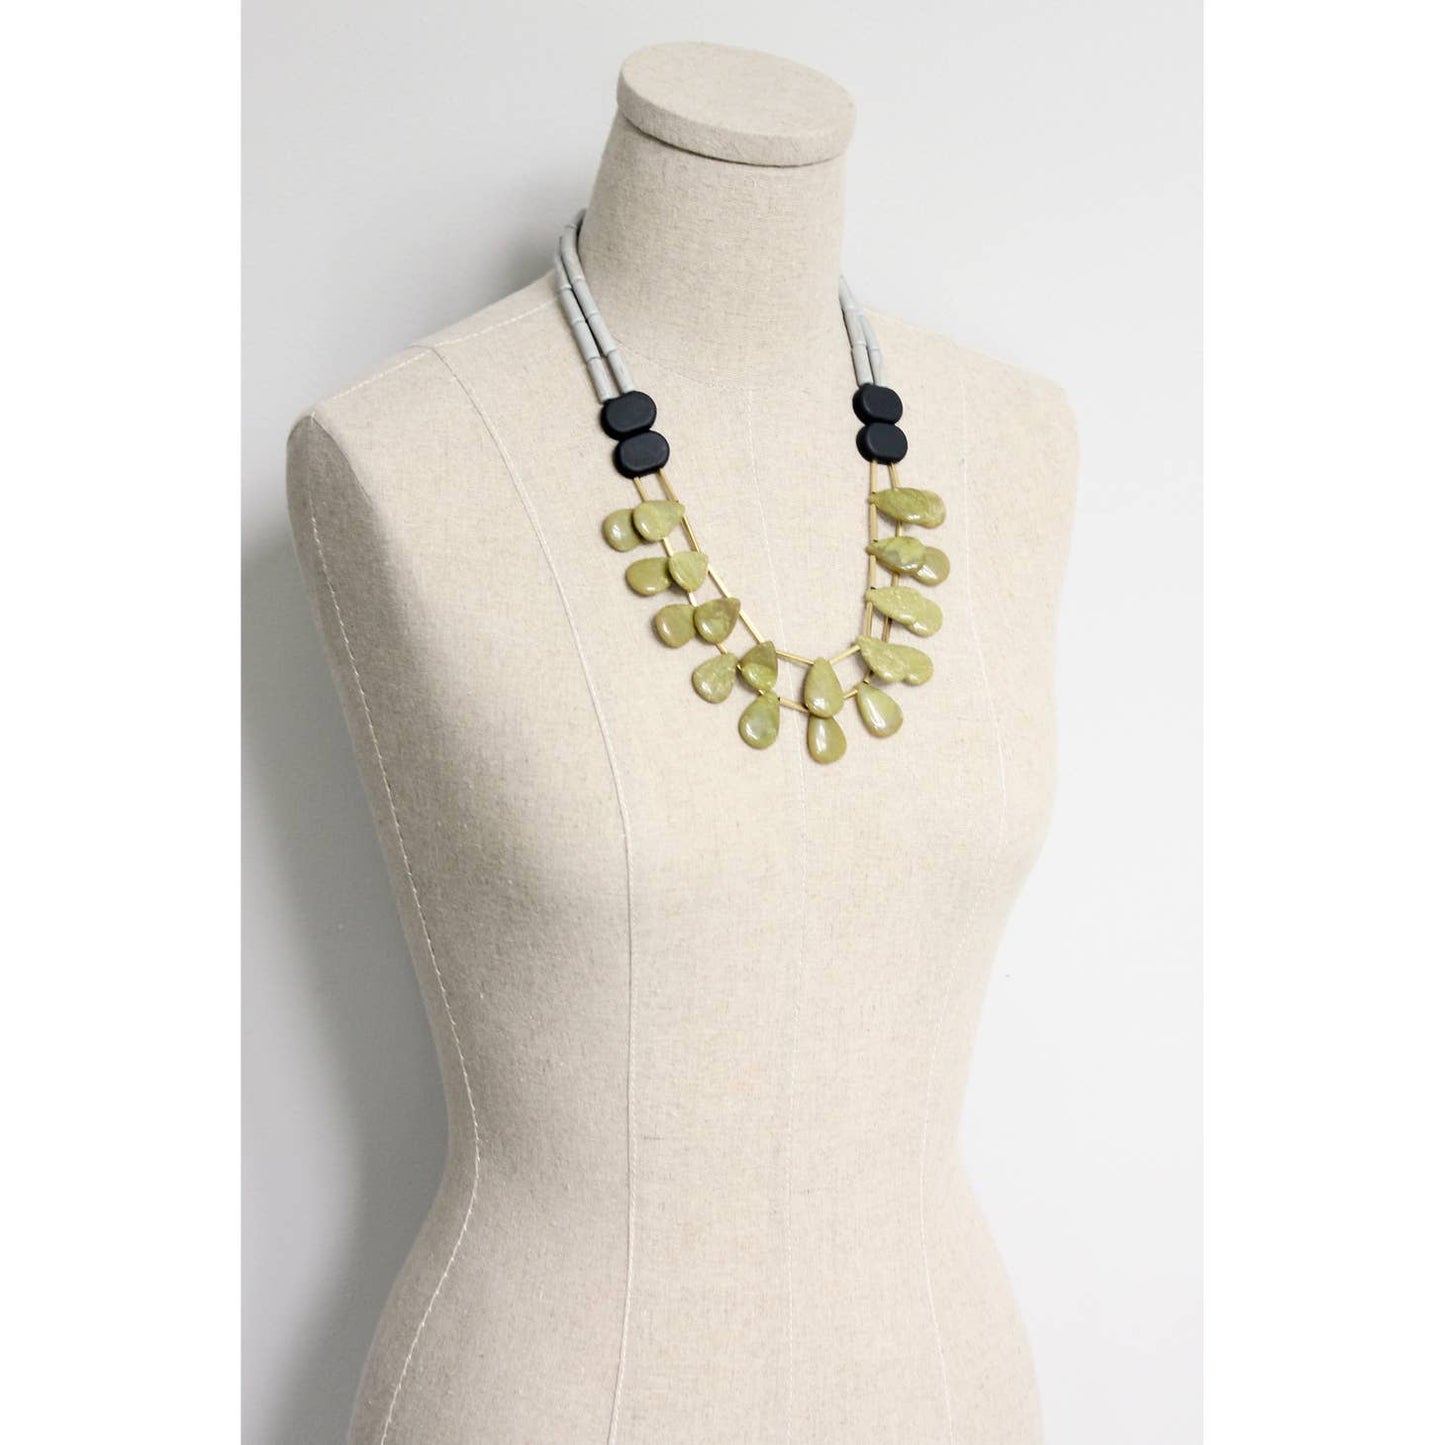 Double Strand Gray and Green Necklace